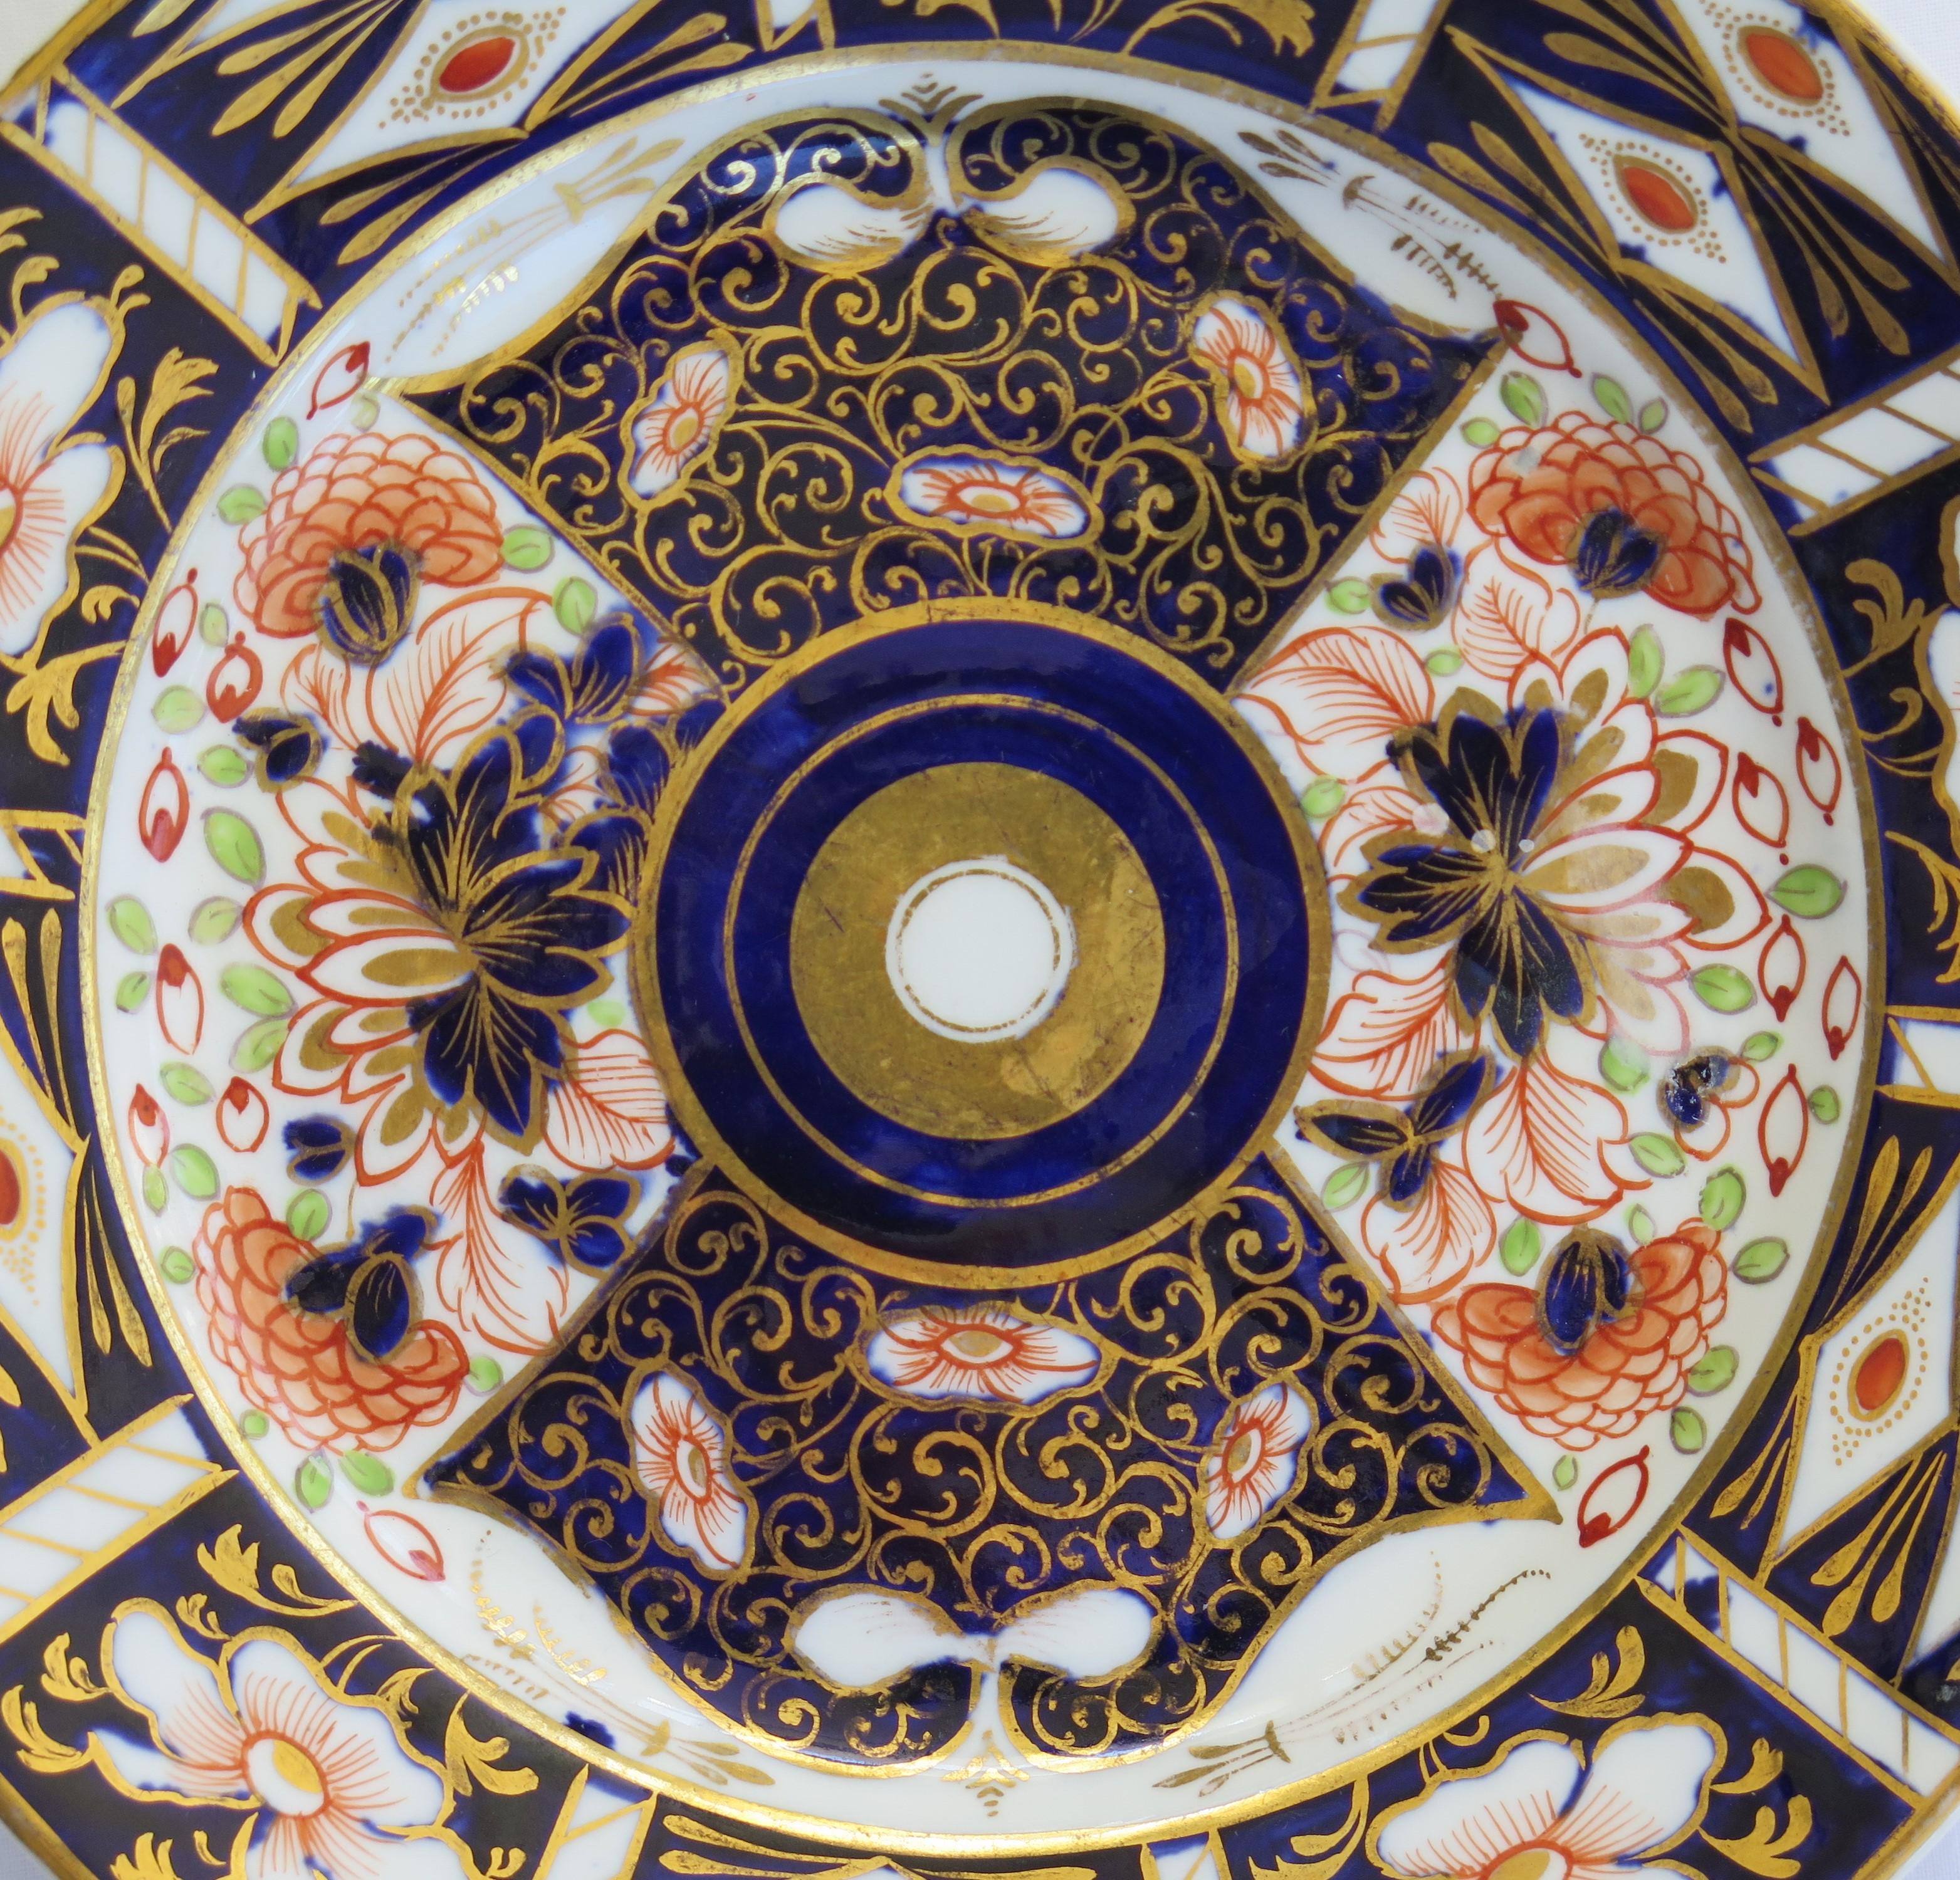 SIX Davenport Porcelain Plates Hand Painted and Gilded Pattern, Circa 1870 For Sale 1